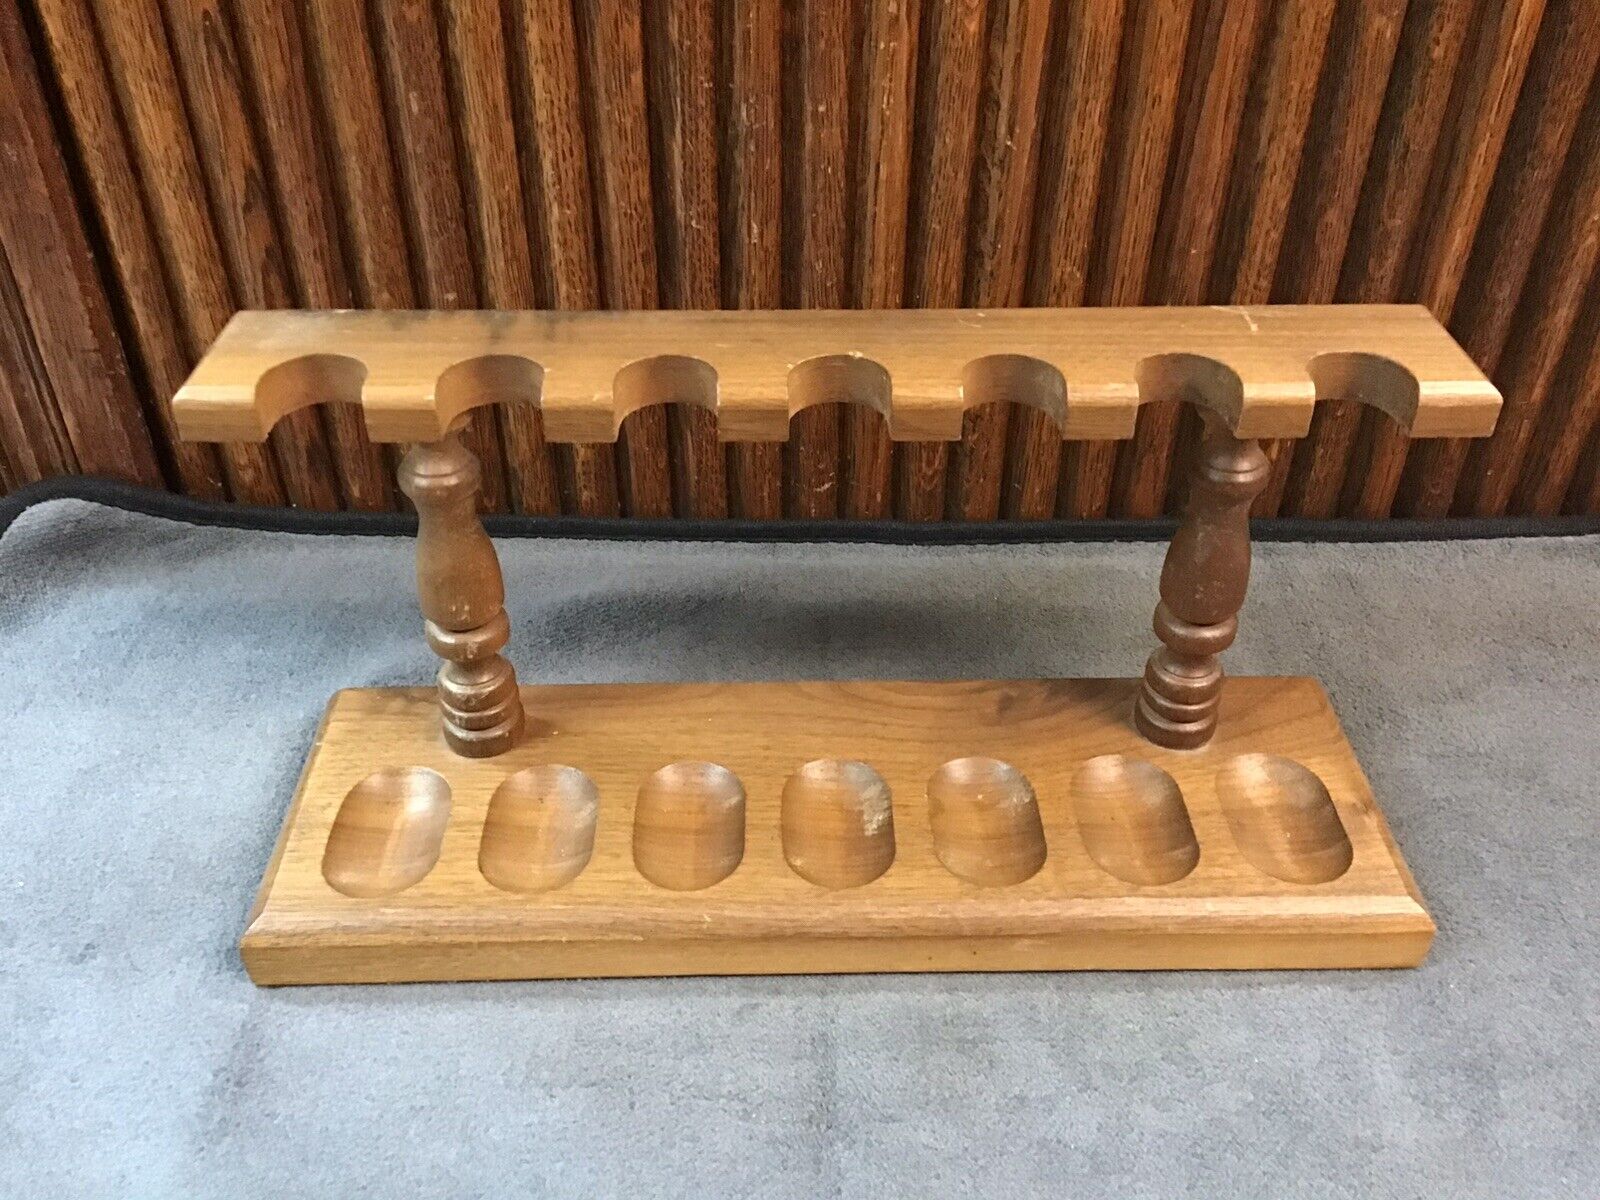 Vintage Custombilt Walnut Tobacco Pipe Rack for 7 pipes